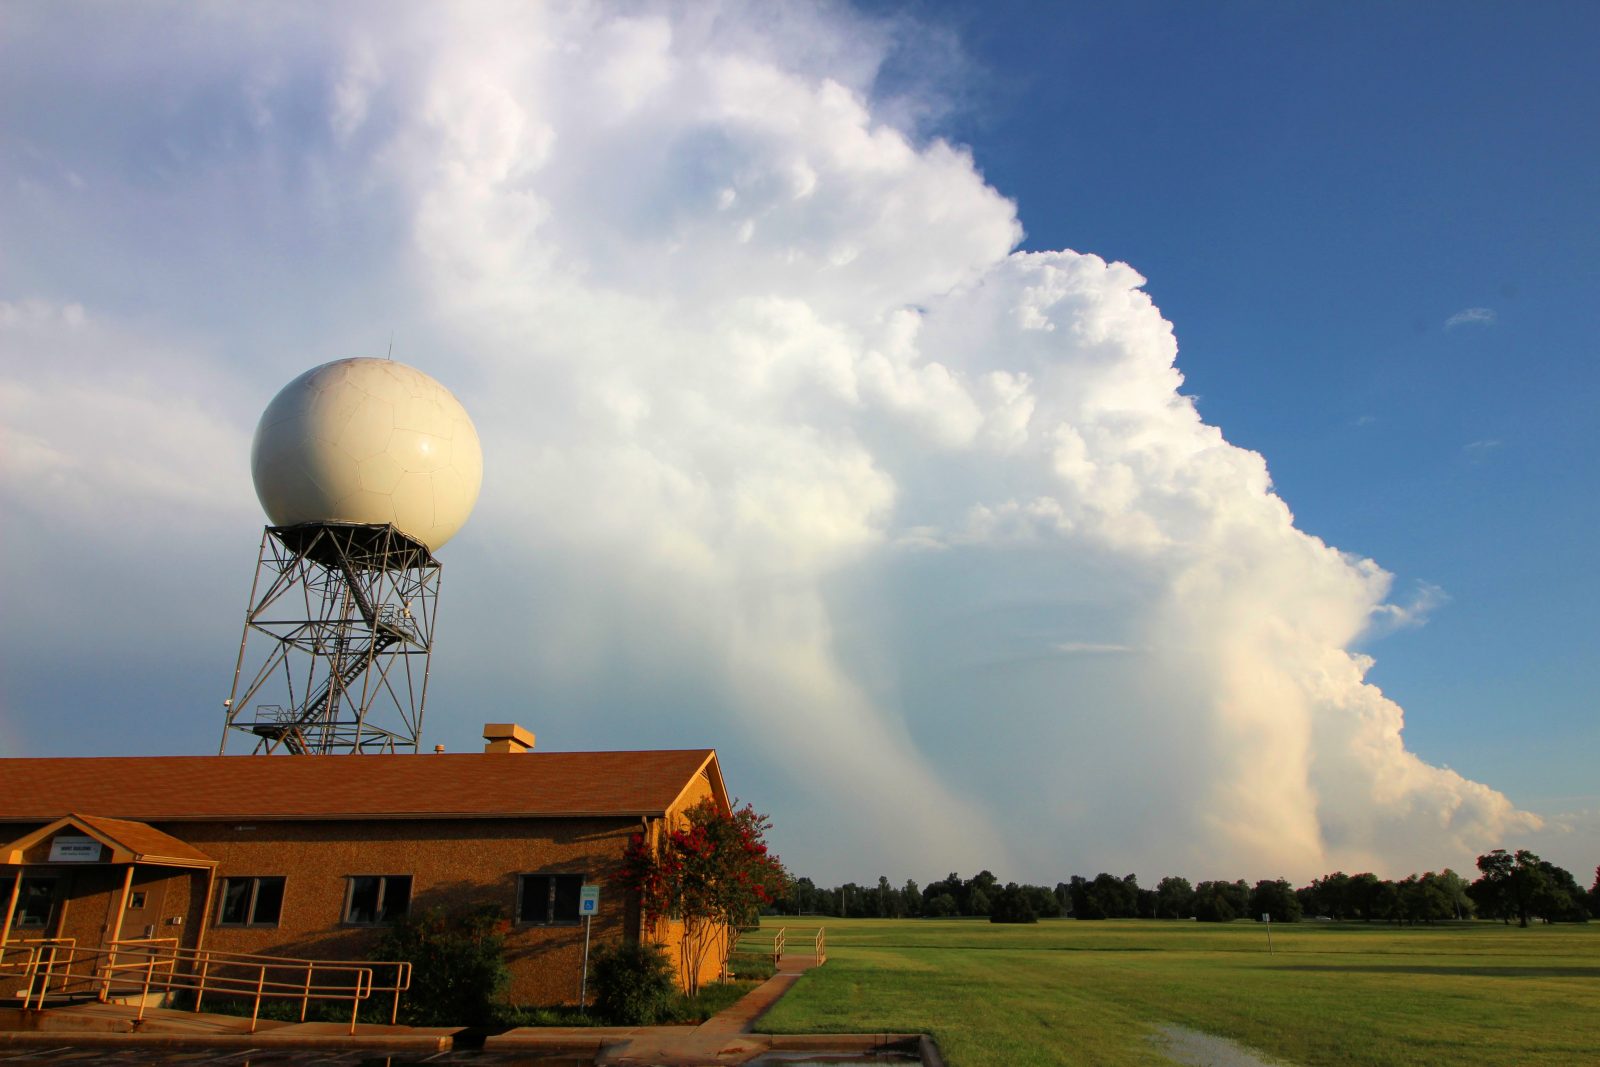 The NOAA National Severe Storms Laboratory research radar collects data on a downburst-producing thunderstorm in Norman